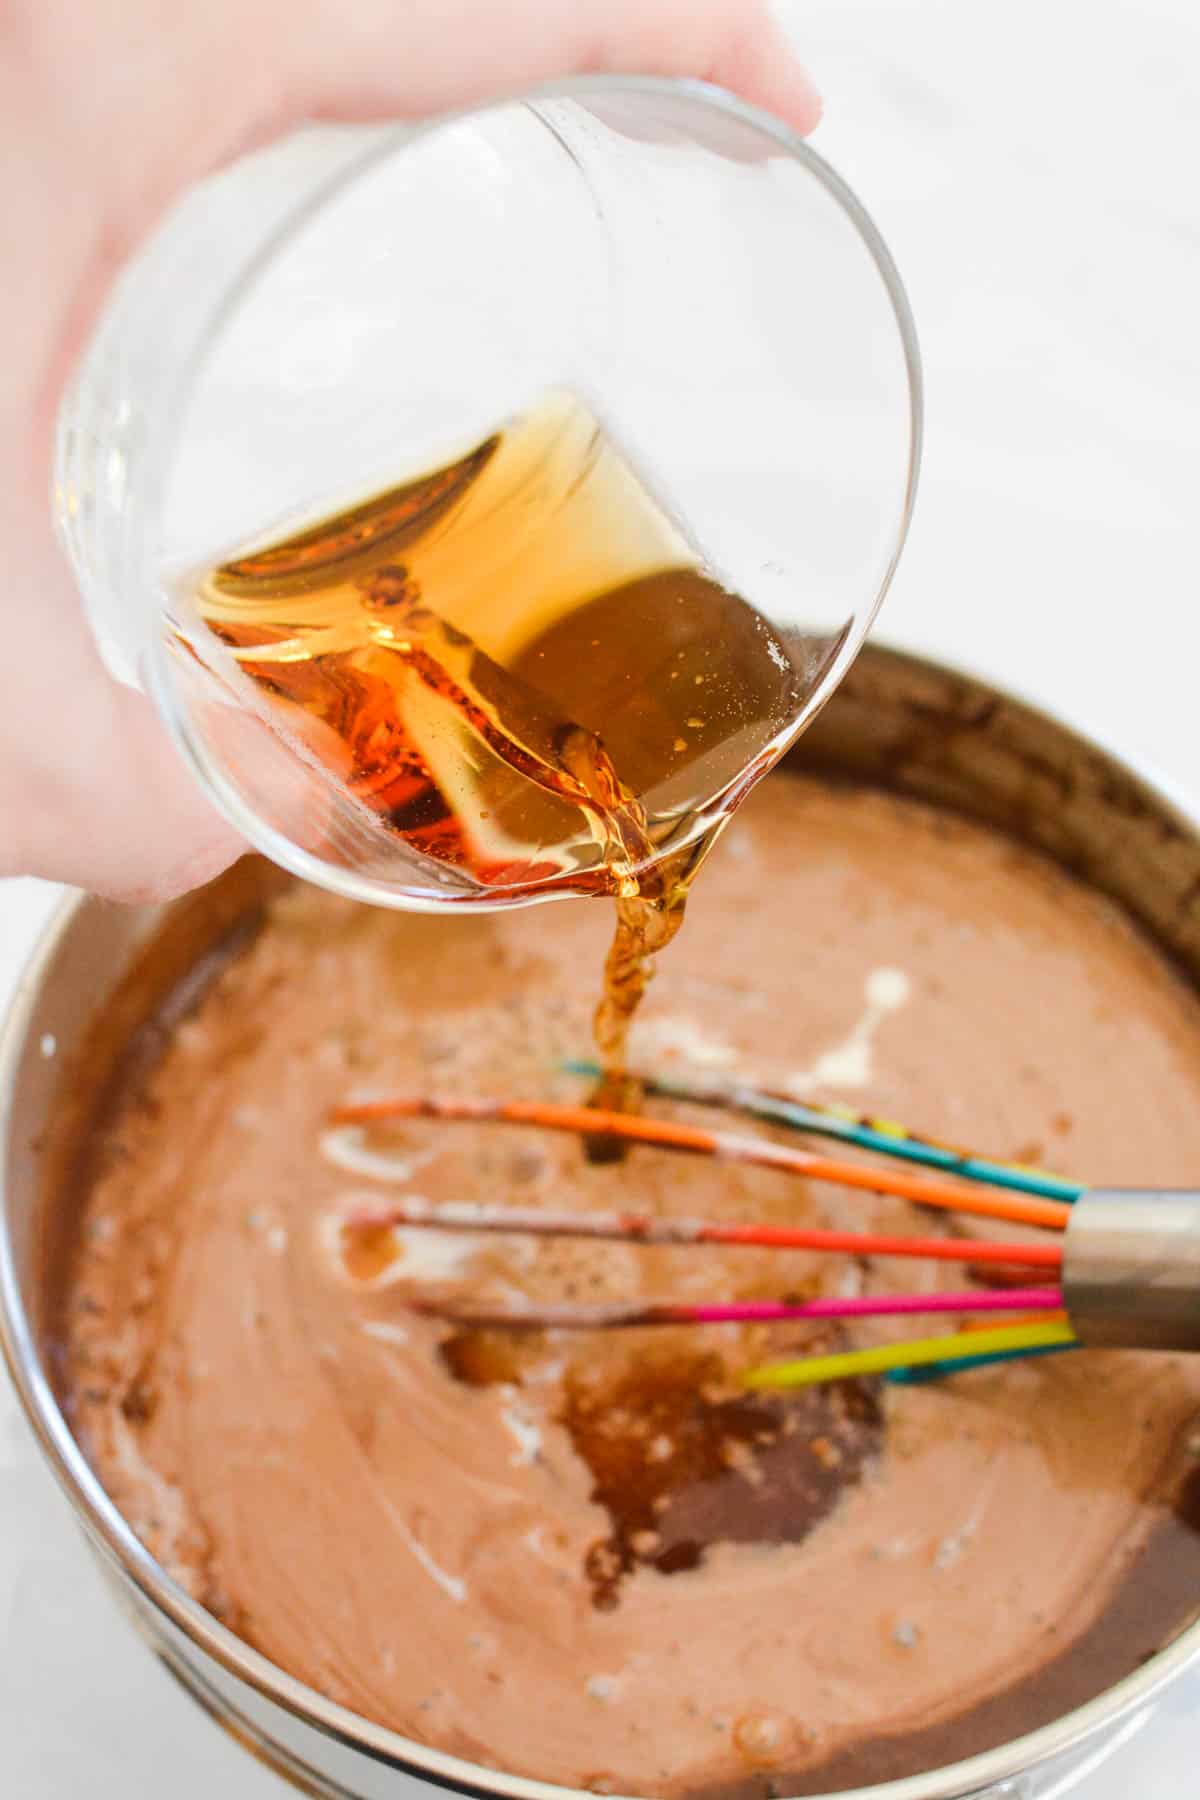 Adding beer to melted chocolate in a saucepan.